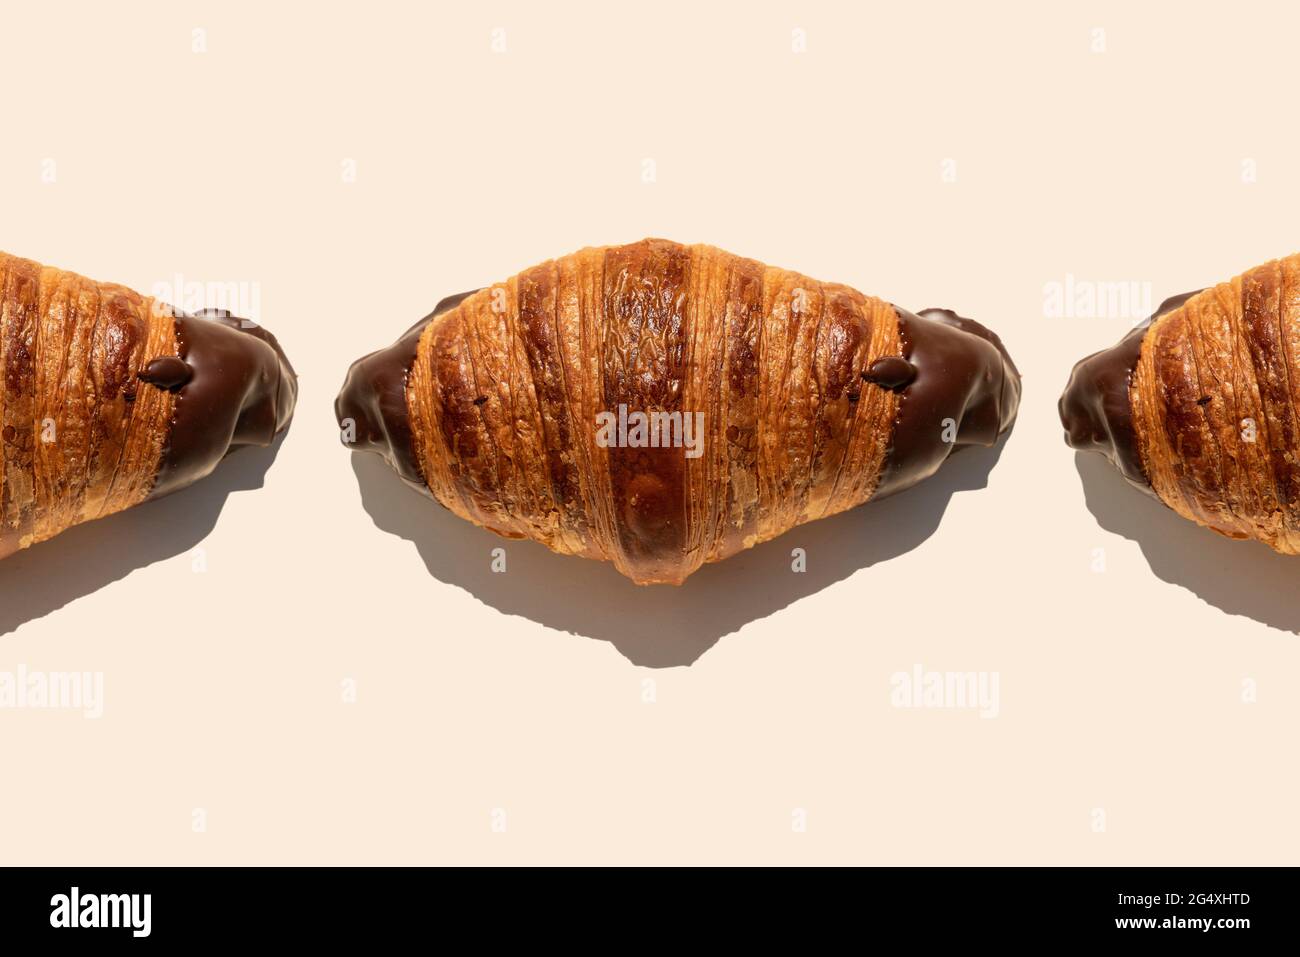 Tempting chocolate croissants on beige background Stock Photo